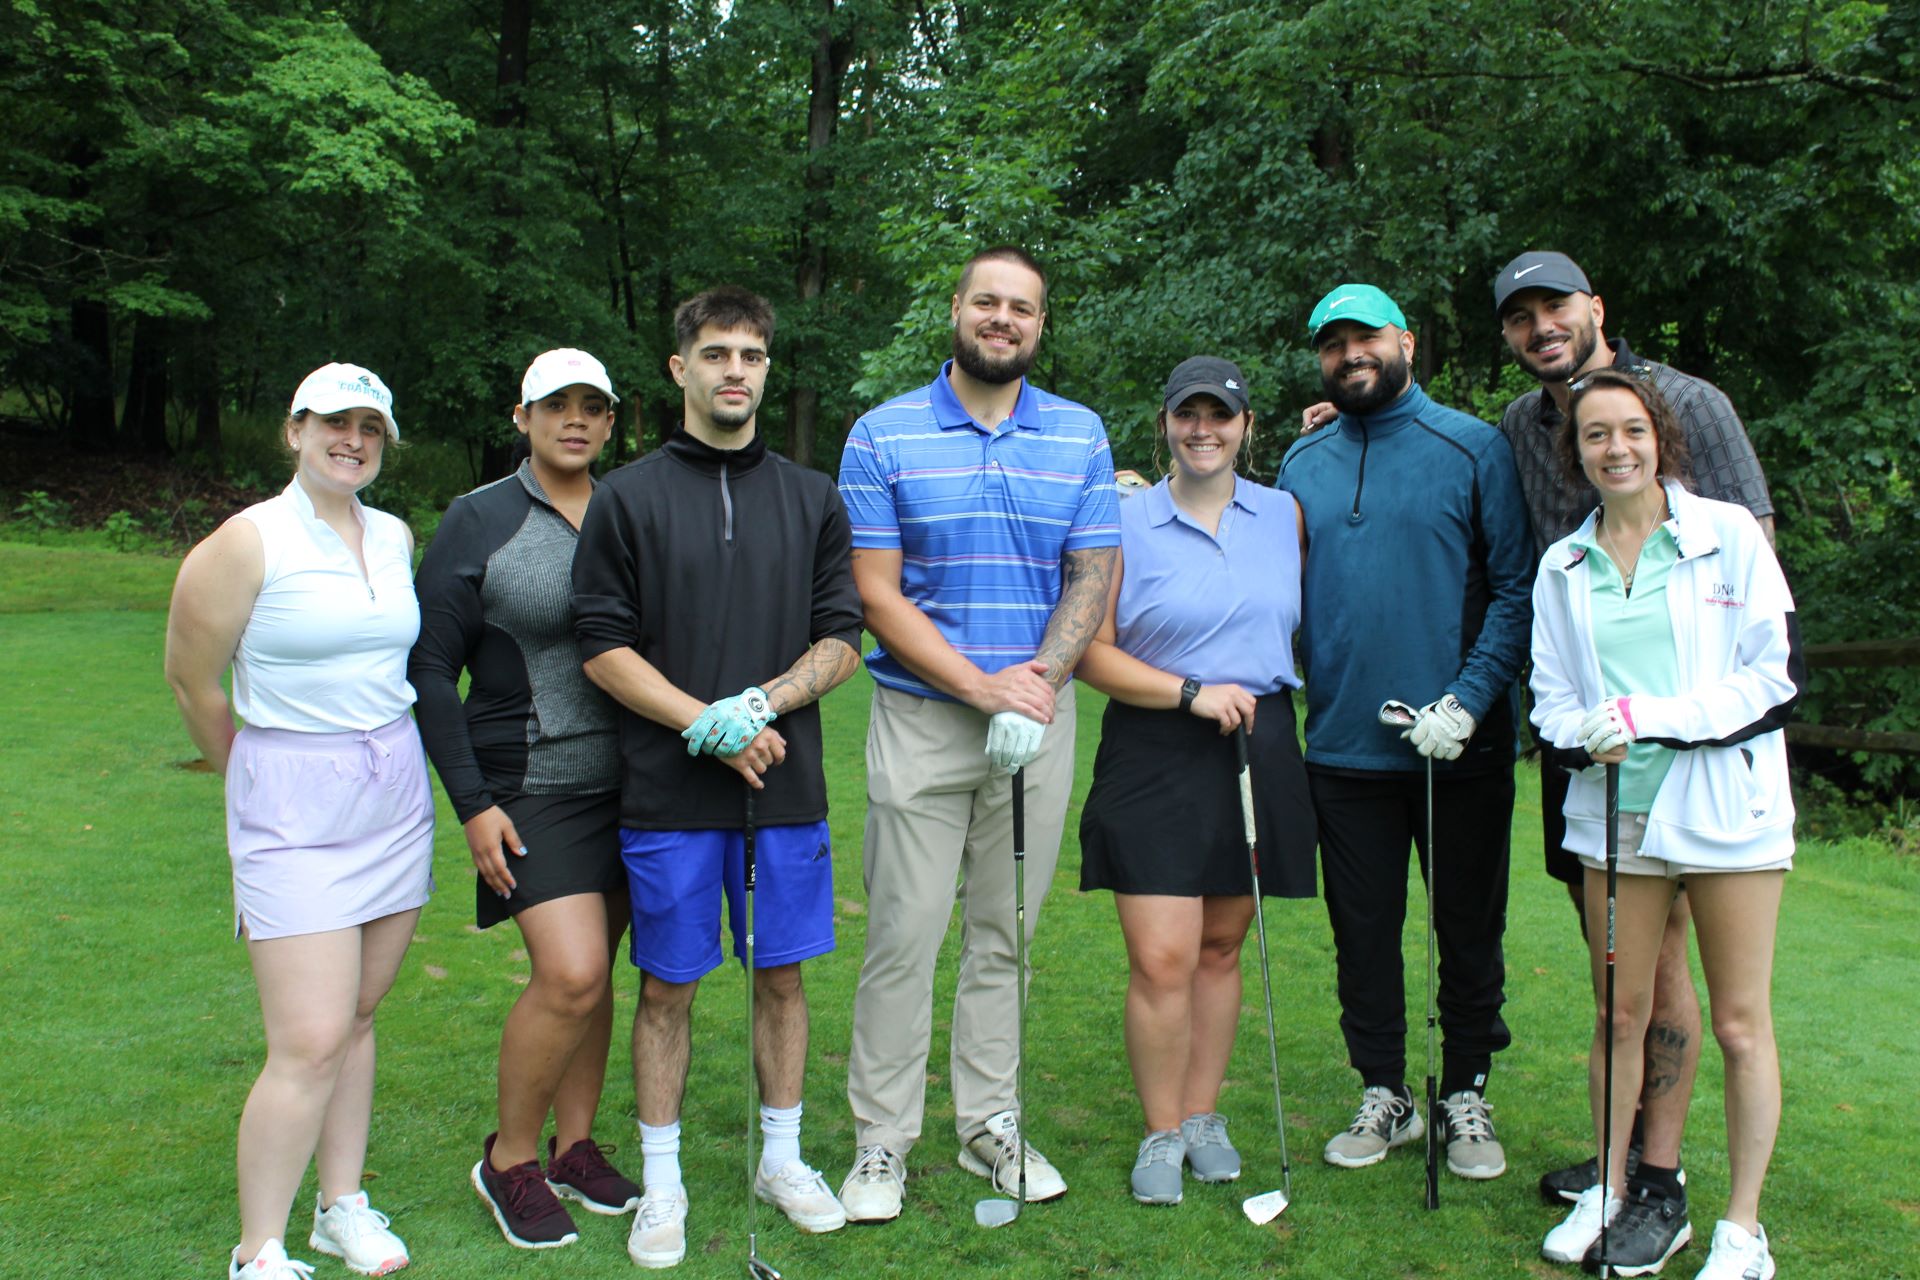 A group of golfers pose for a picture on the green at a charity golf outing